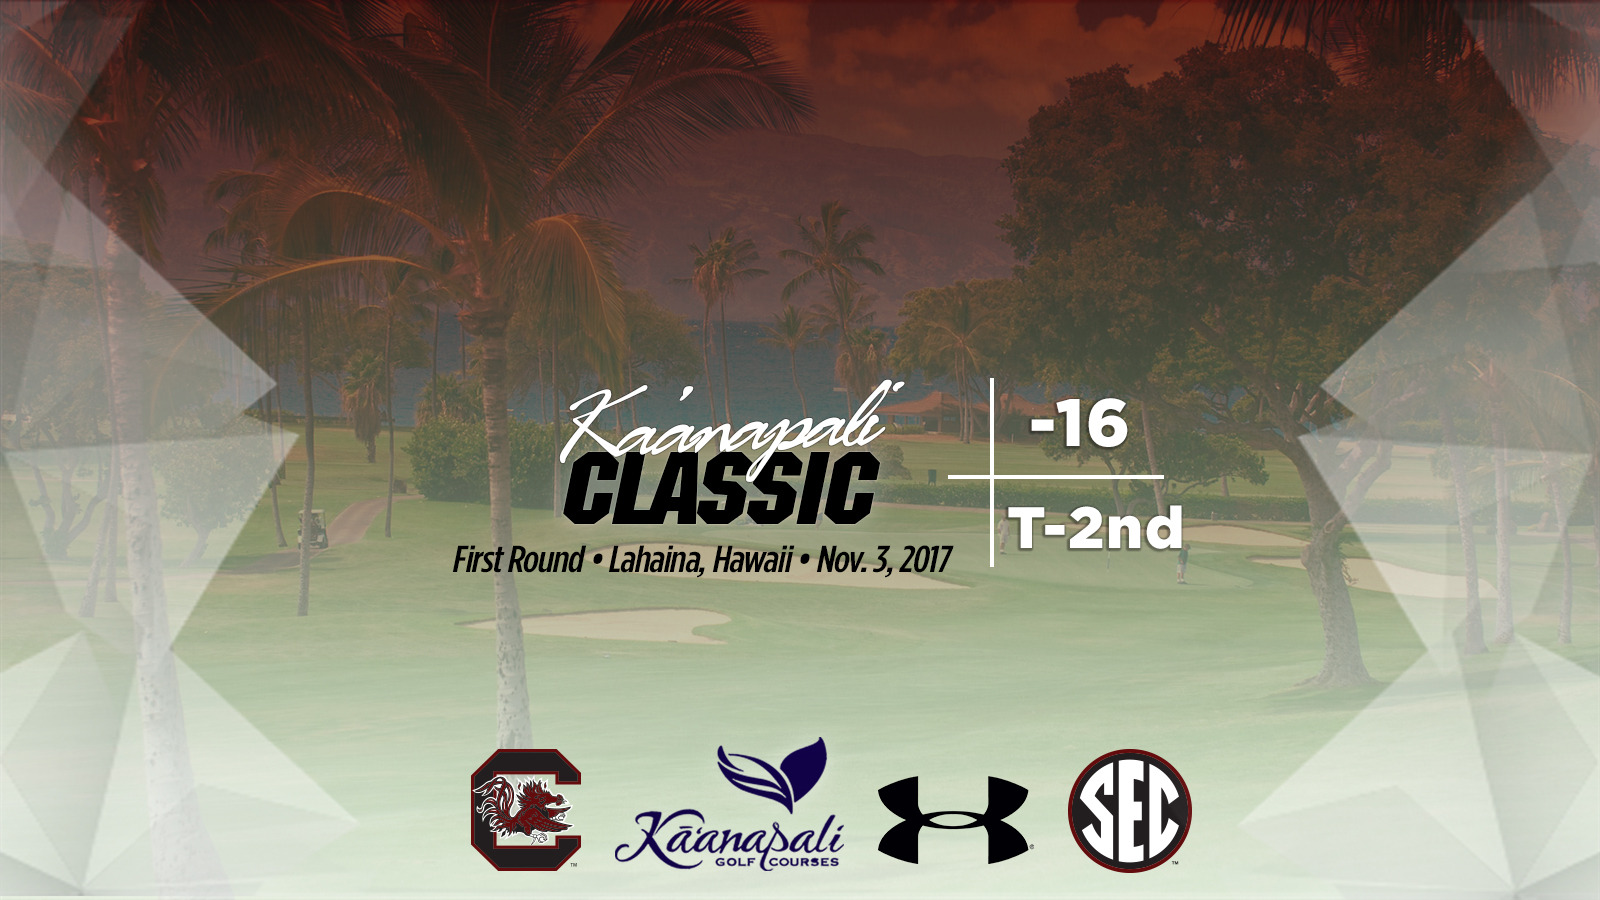 Gamecocks T-2nd in Hawaii After Lights Out 268 (-16) in R1